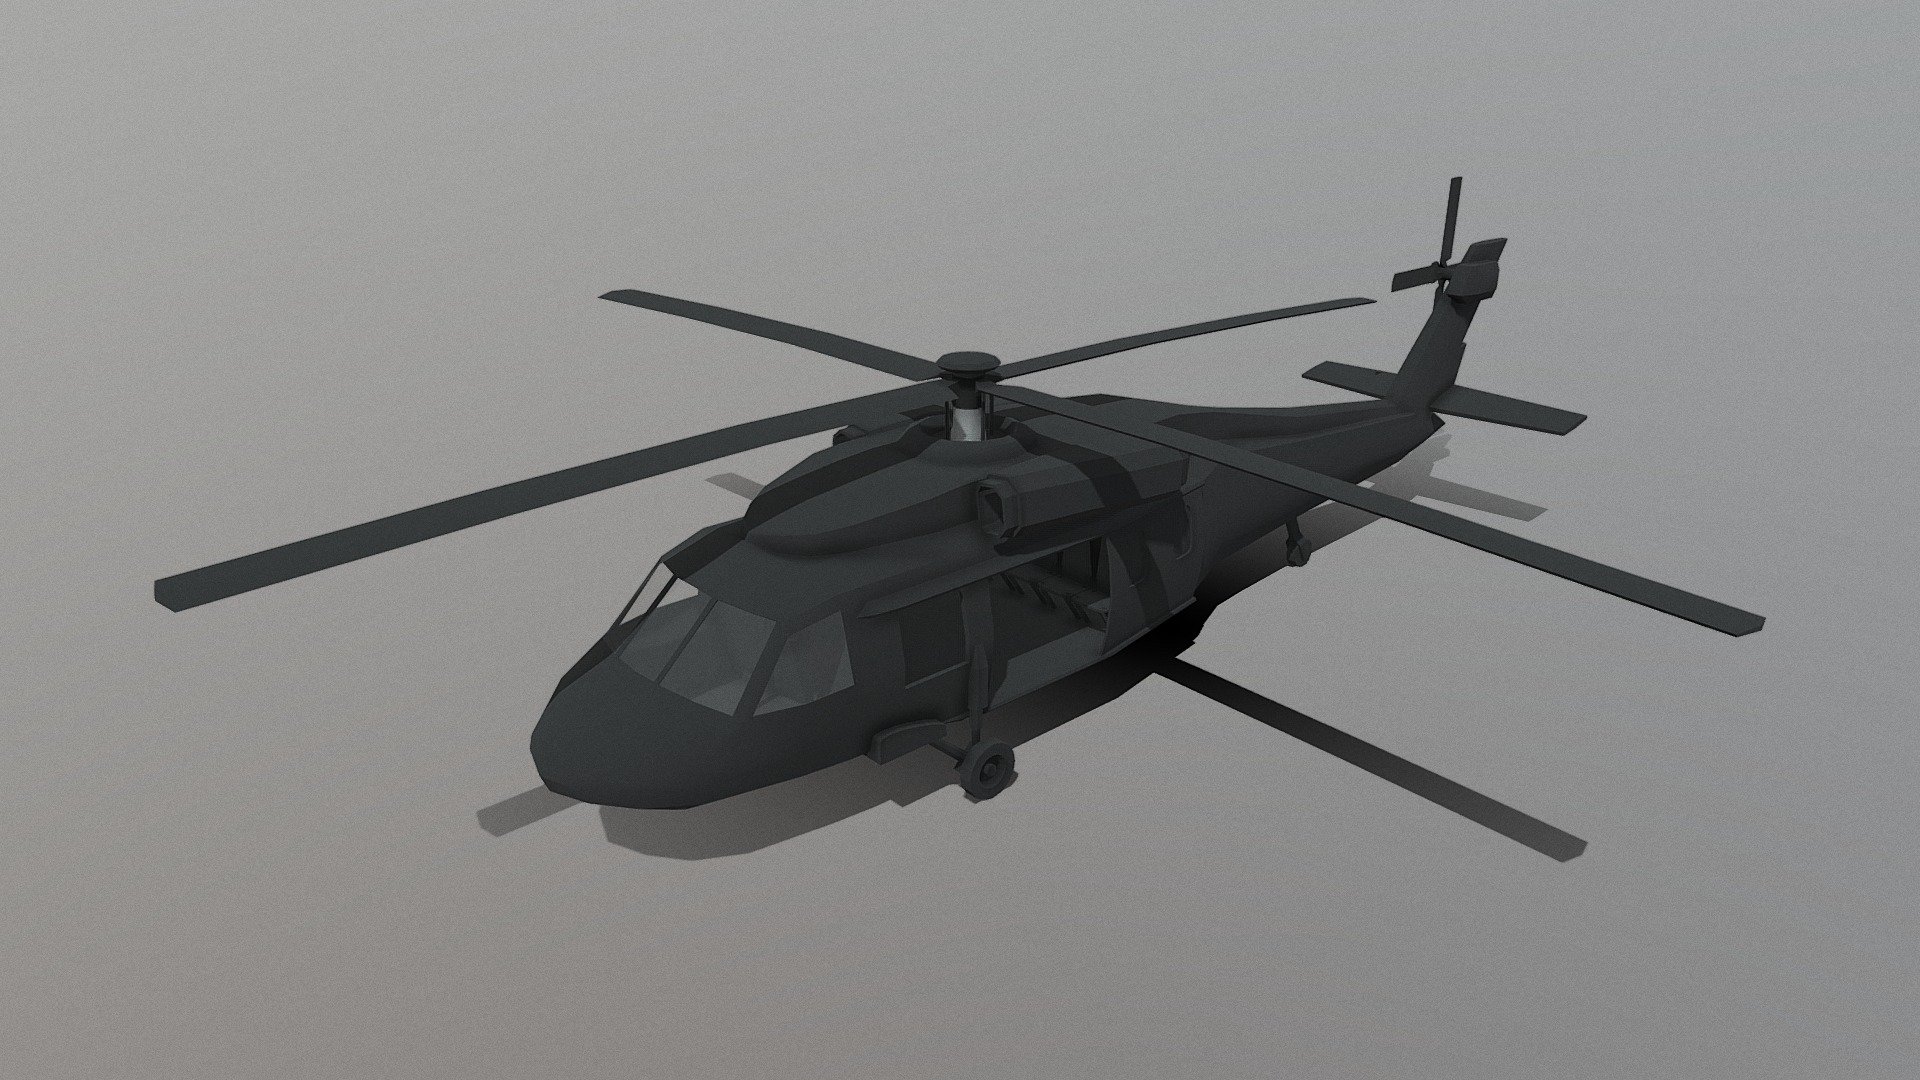 This is a low poly 3D model of the Black Hawk Helicopter. It was modeled and prepared for low-poly style renderings and game development.

Modeled in Blender 3d model